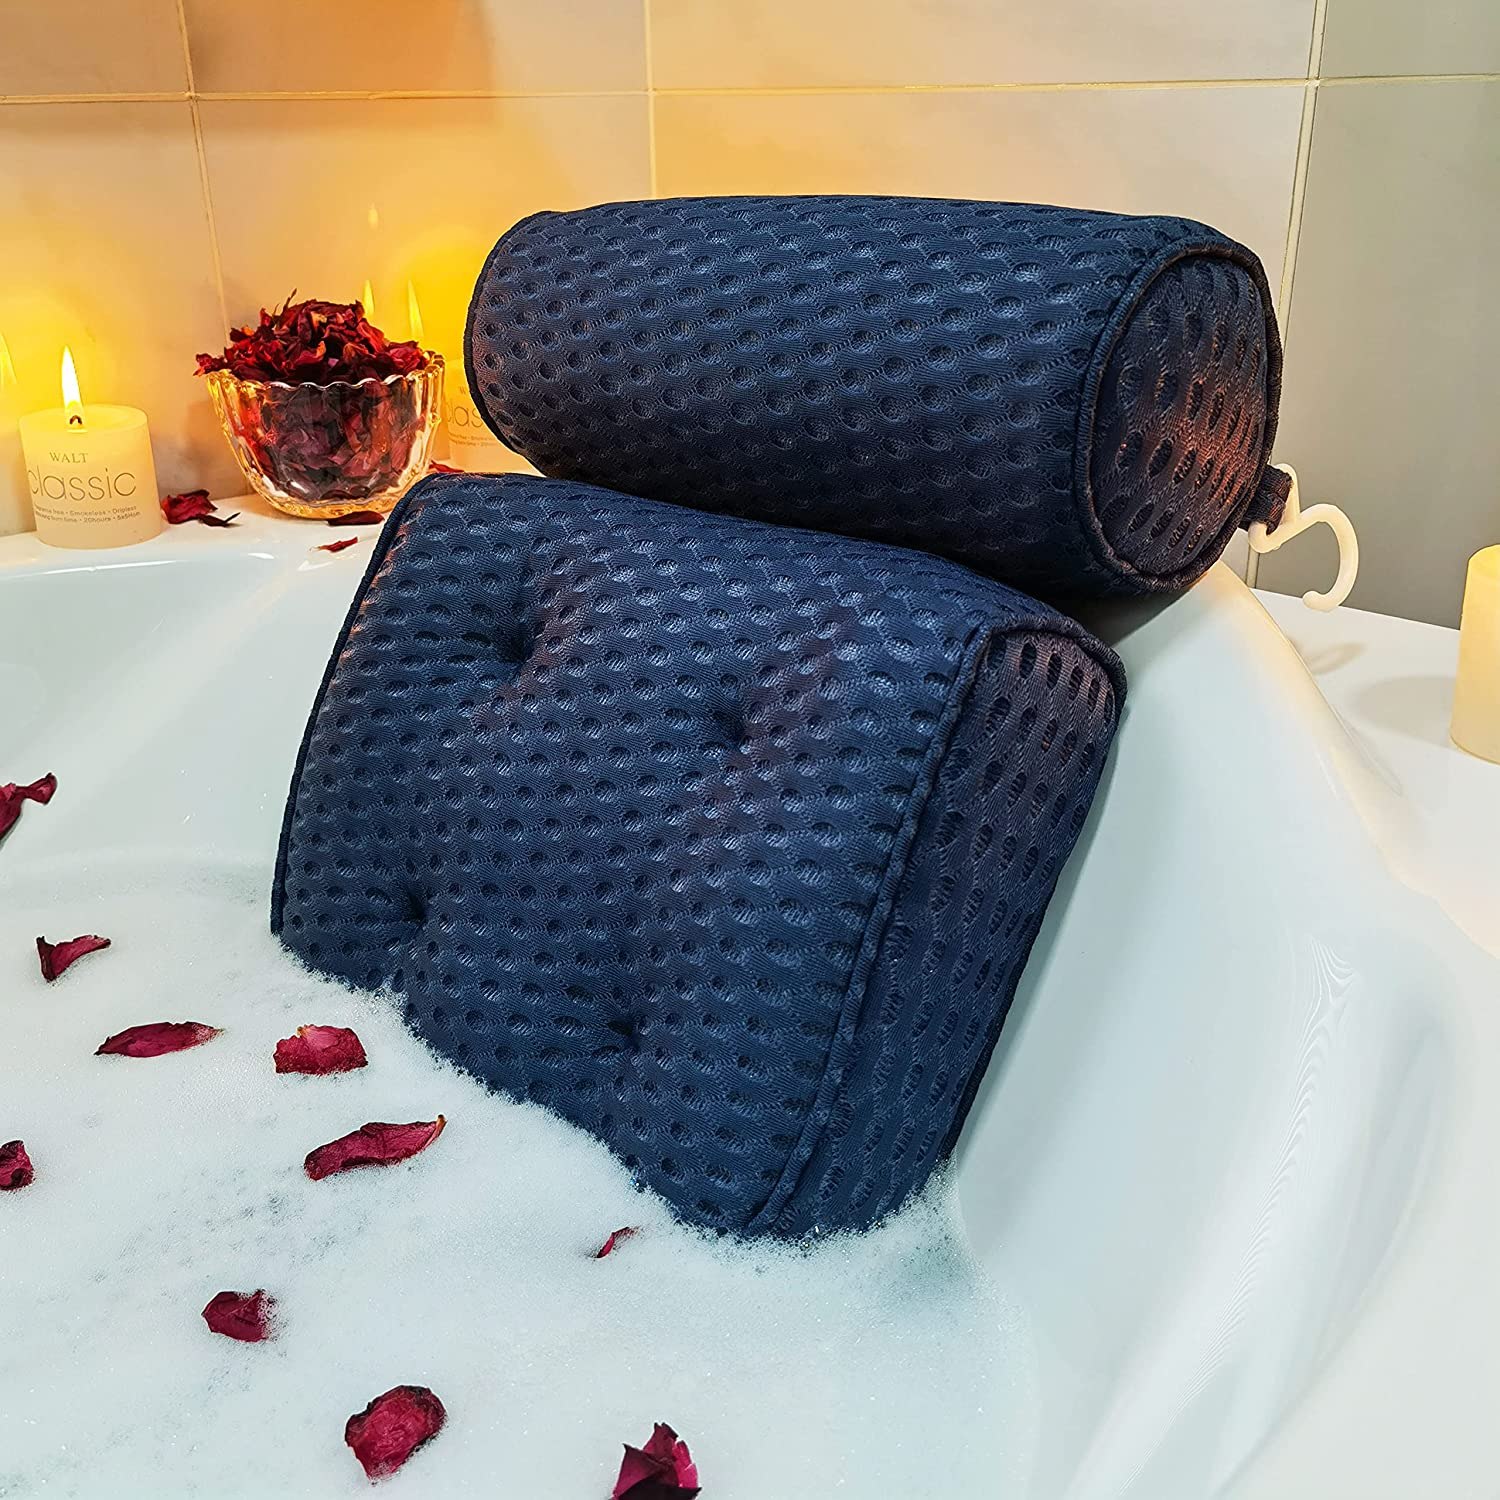 12 Best Bath Pillows to Recreate a Spa-Like Ambience